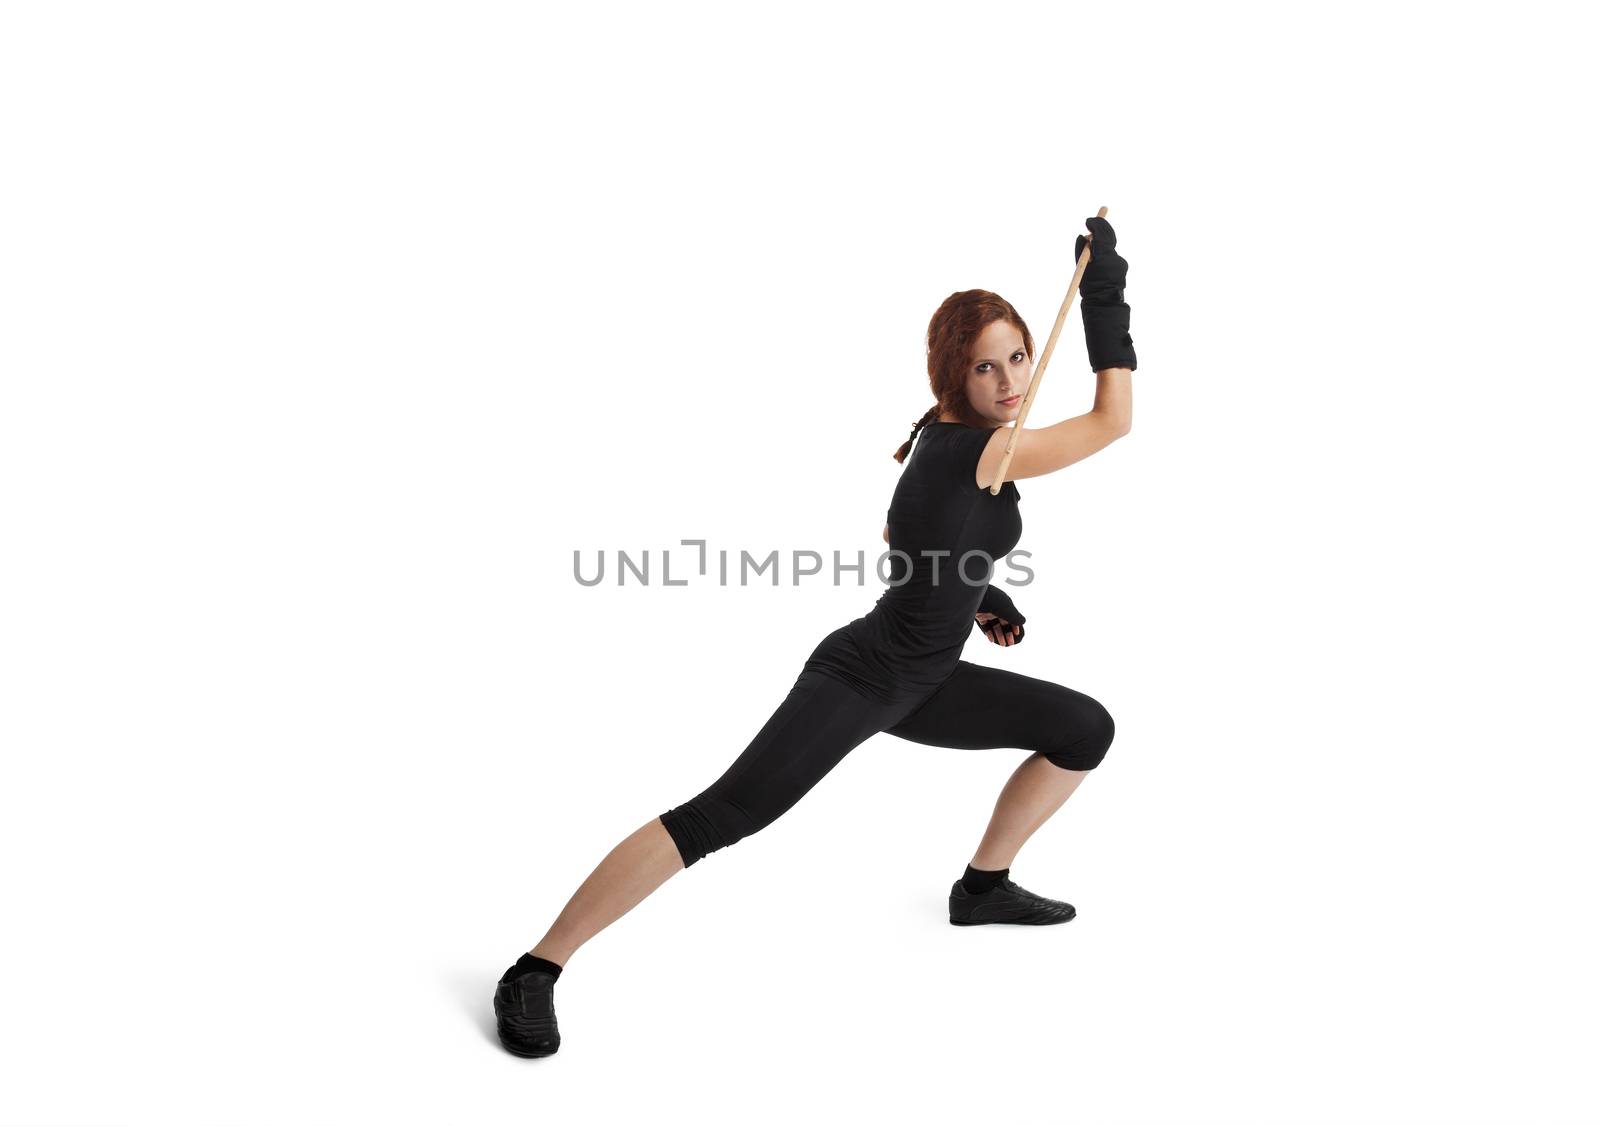 Woman Fencing On White Background